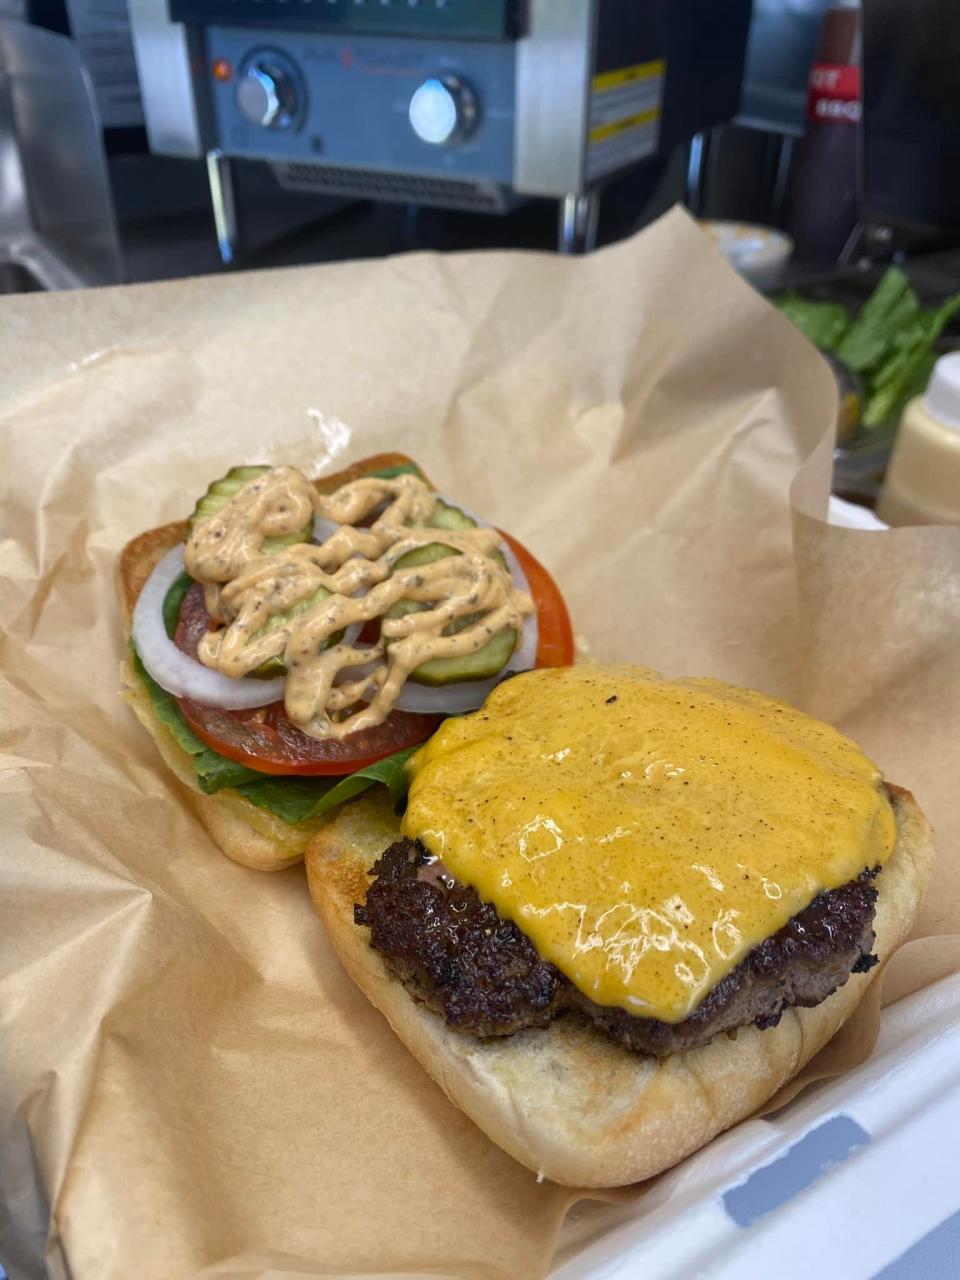 The Top Bun ‘Jester’ is a top-seller, it is a 1/3 lb grass fed burger, topped with your choice of cheese, lettuce, tomato, onion, pickles, served with the “top bun” sauce.